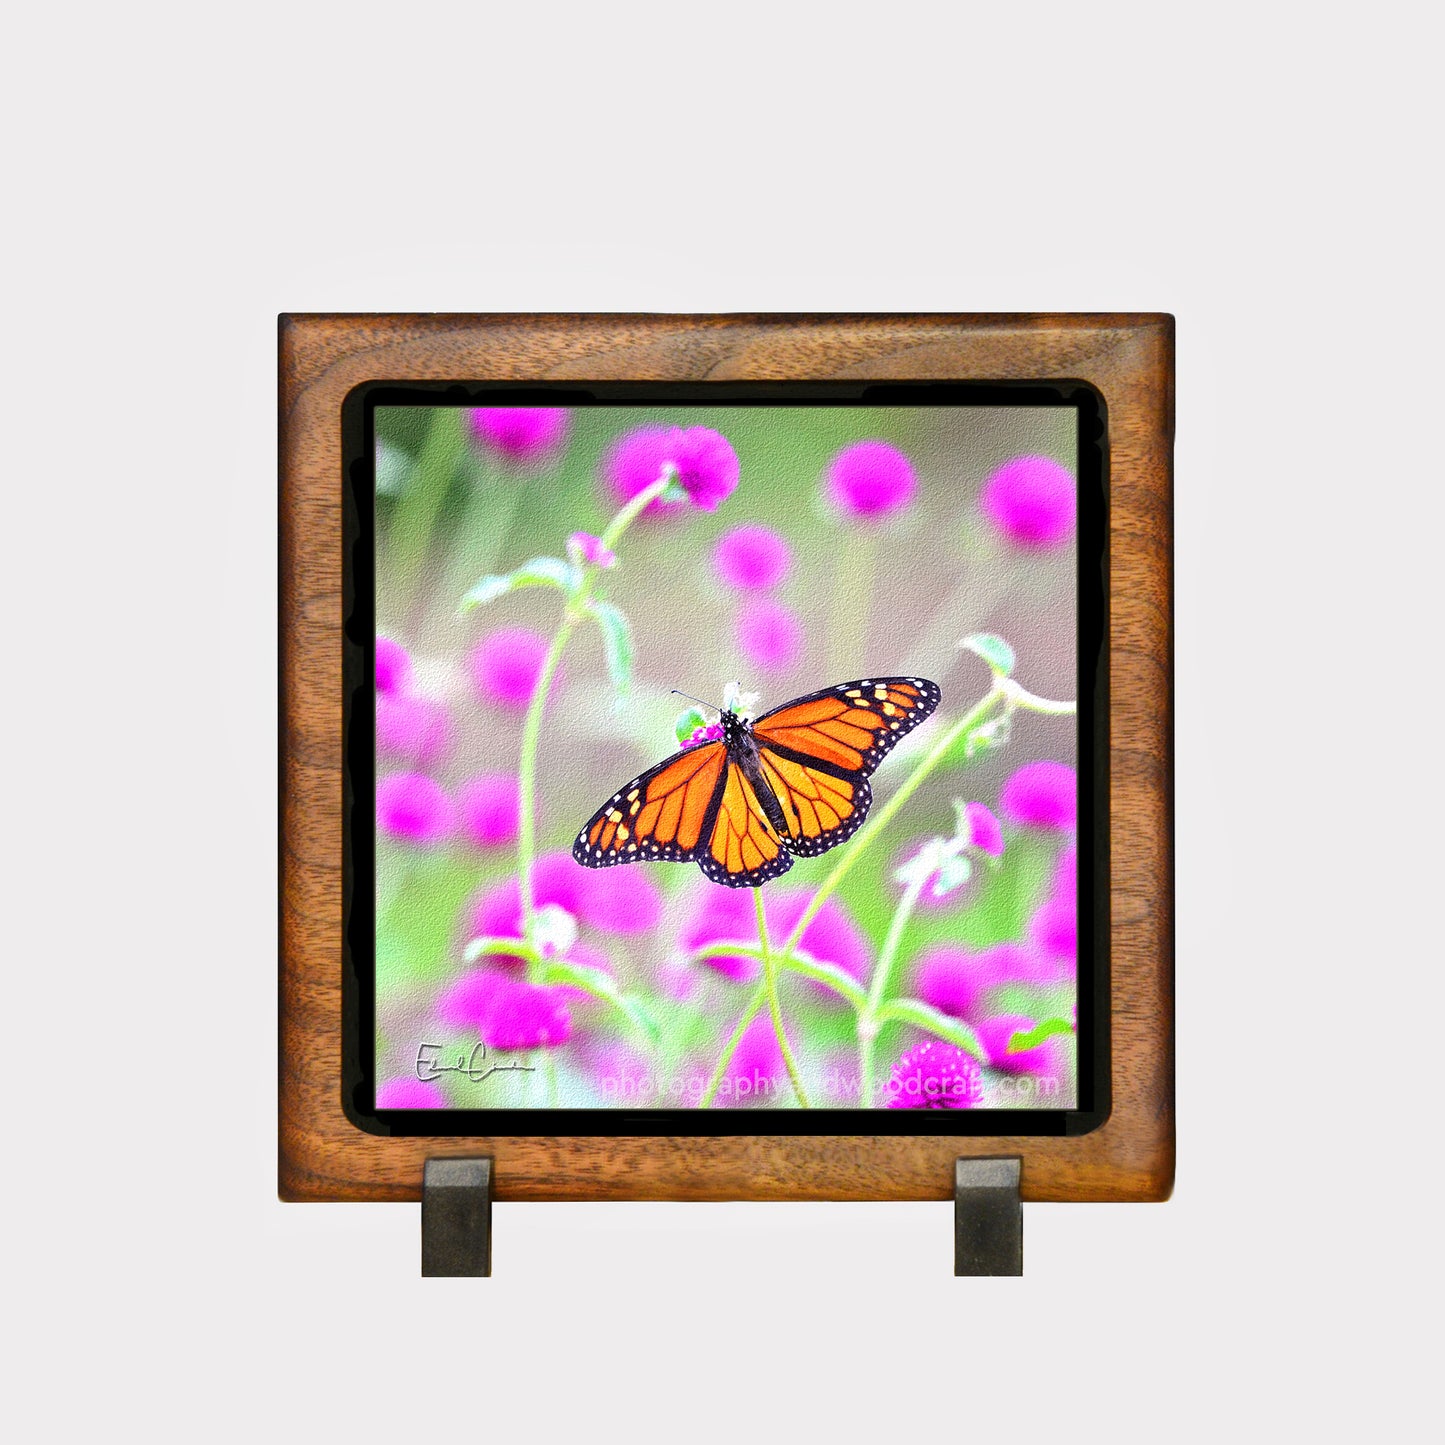 5" x 5" Monarch Butterfly. Canvas Print in Solid Wood Floating Frame